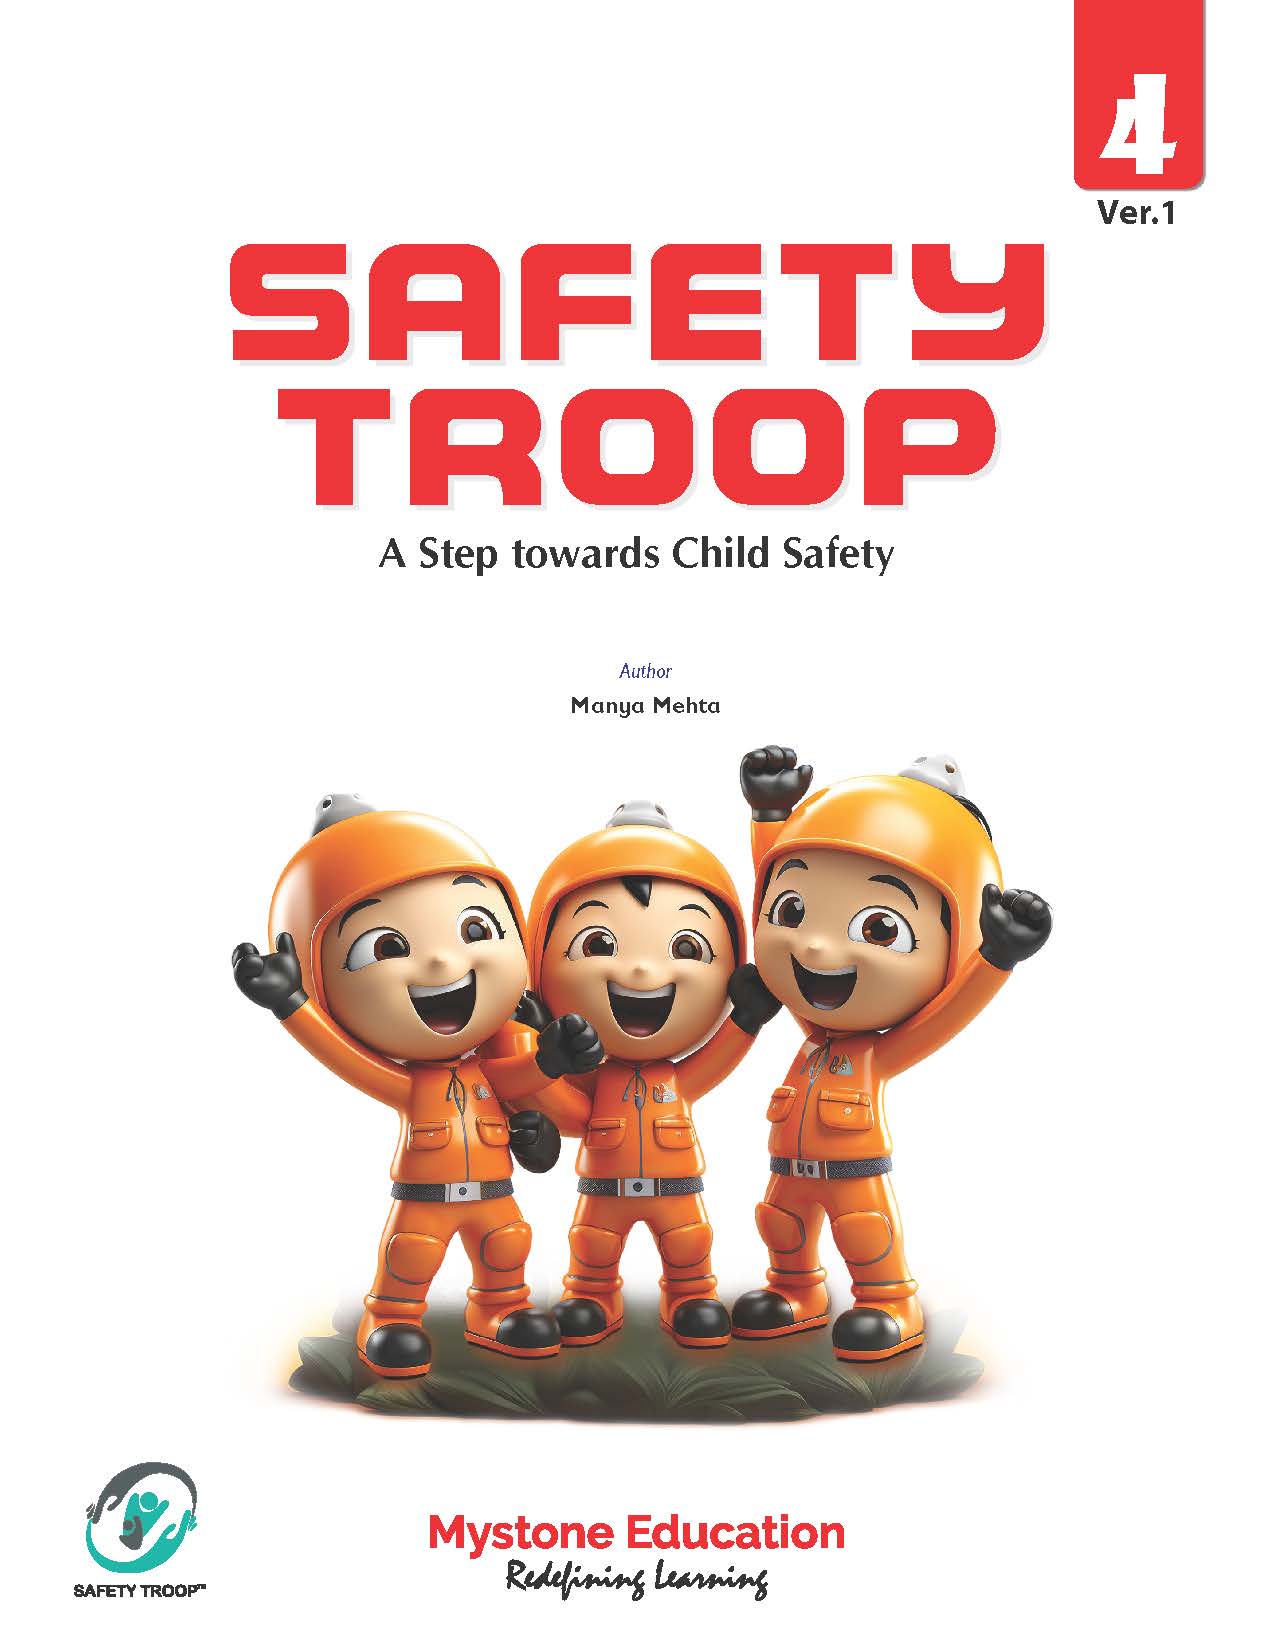 Safety Troop (A Step Towards Child Safety) Class 4 Ver 1